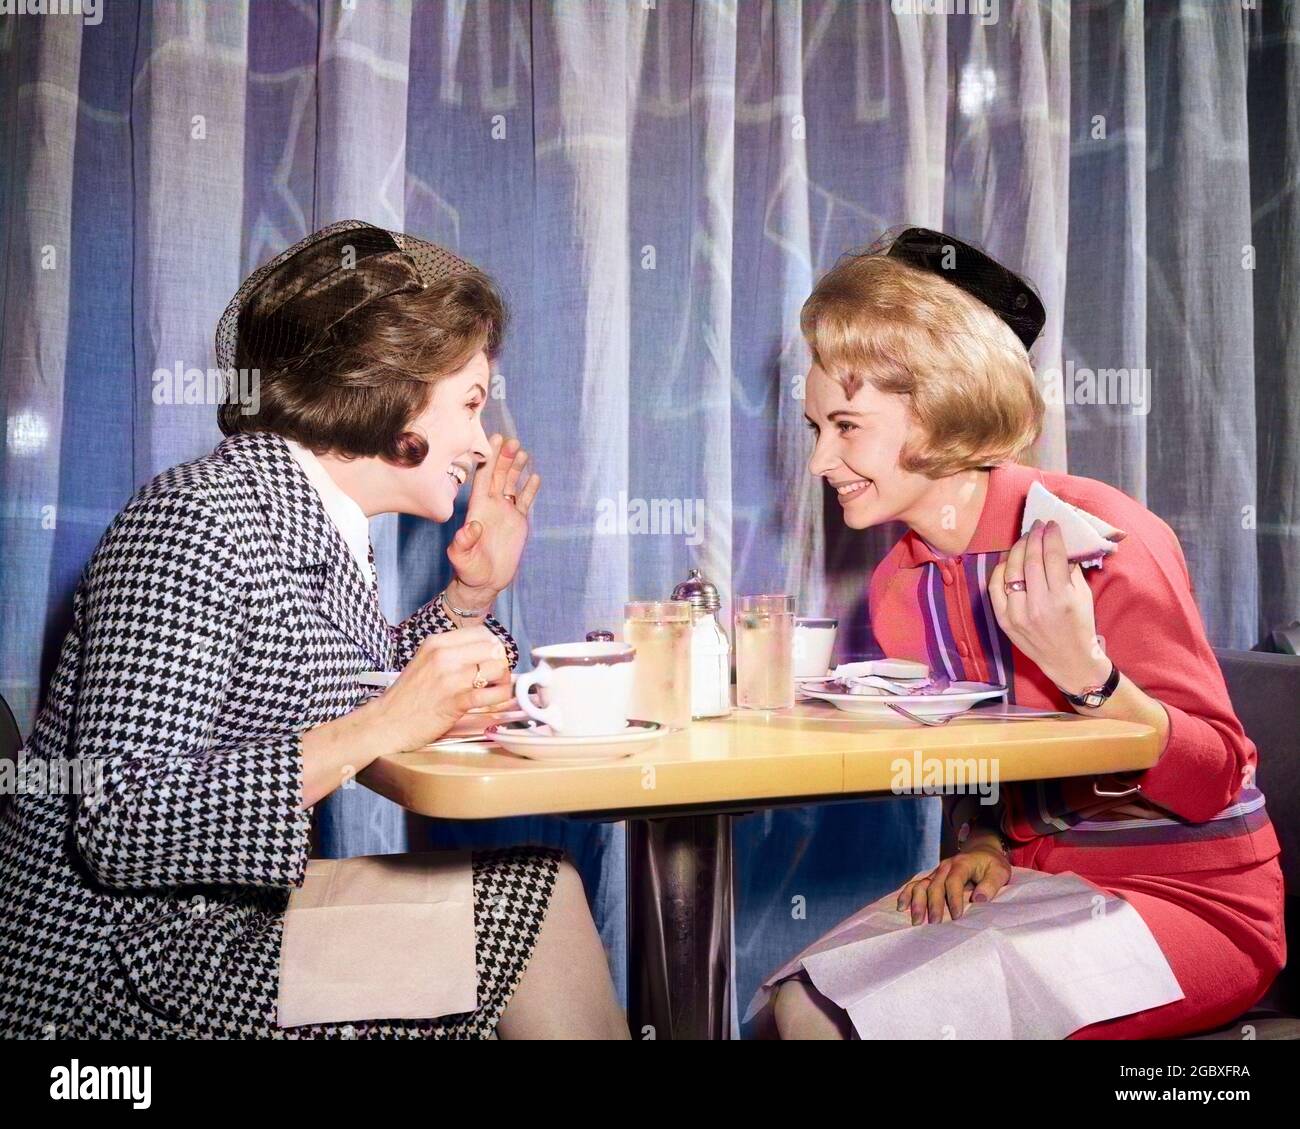 1960s TWO WOMEN GOSSIPING AT LUNCH IN RESTAURANT - d5256c HAR001 HARS COLOR SHARING CURTAIN RELATIONSHIP OLD TIME ARCHIVE NOSTALGIA LEANING OLD FASHION CONVERSATION STYLE COMMUNICATION FRIEND BEST INFORMATION SNACK LIFESTYLE LISTEN GOSSIP RELATION SEATED FRIENDSHIP HALF-LENGTH SIT SPEAK SUGAR VEIL AMERICANA SHARE GOSSIPING FOODS SNACK FOODS KNIT GIRLFRIEND PRIVATE SNACKS ARCHIVAL SNACK FOOD EXCITEMENT KNOWLEDGE PILLBOX TELLING DRAPERY CANDID FEMININE HOUNDS TOOTH LUNCHEON NEIGHBOR RUMOR STYLISH BEST FRIEND CONFIDANT HOUNDS-TOOTH LUNCHEONETTE MID-ADULT MID-ADULT WOMAN TOGETHERNESS Stock Photo